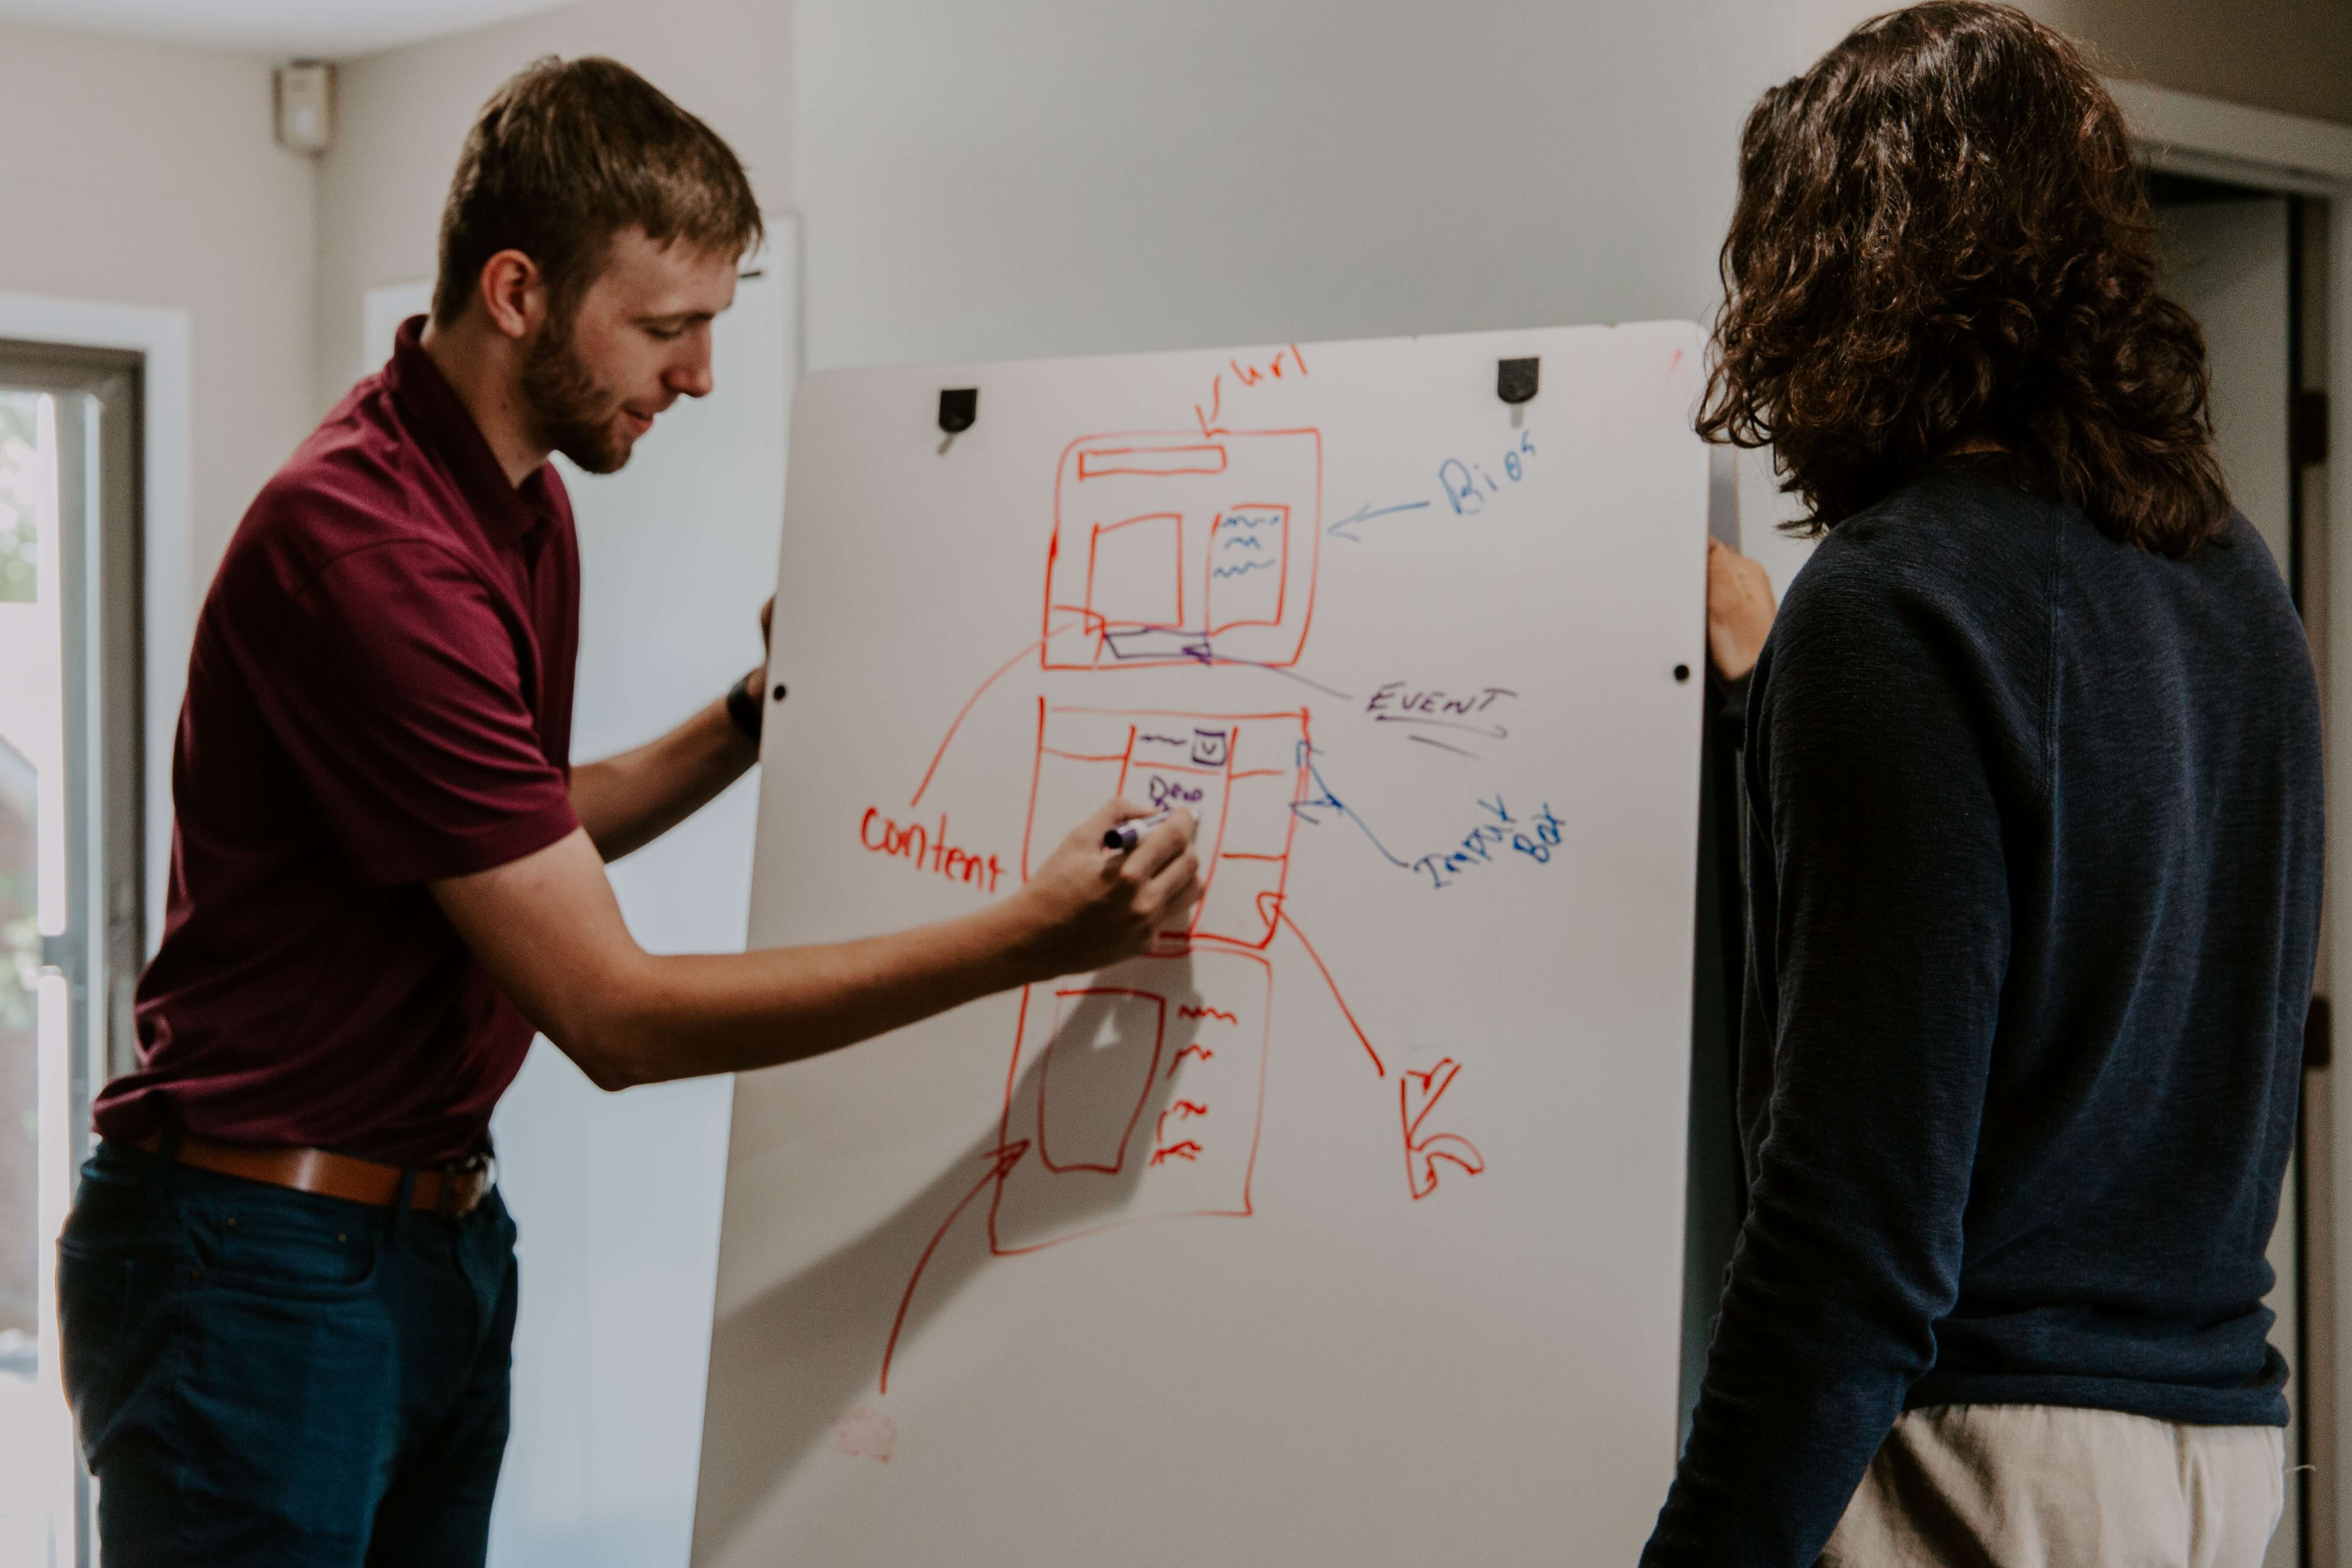 Image representing agile content marketing where Two people are standing near a white board and writing on it